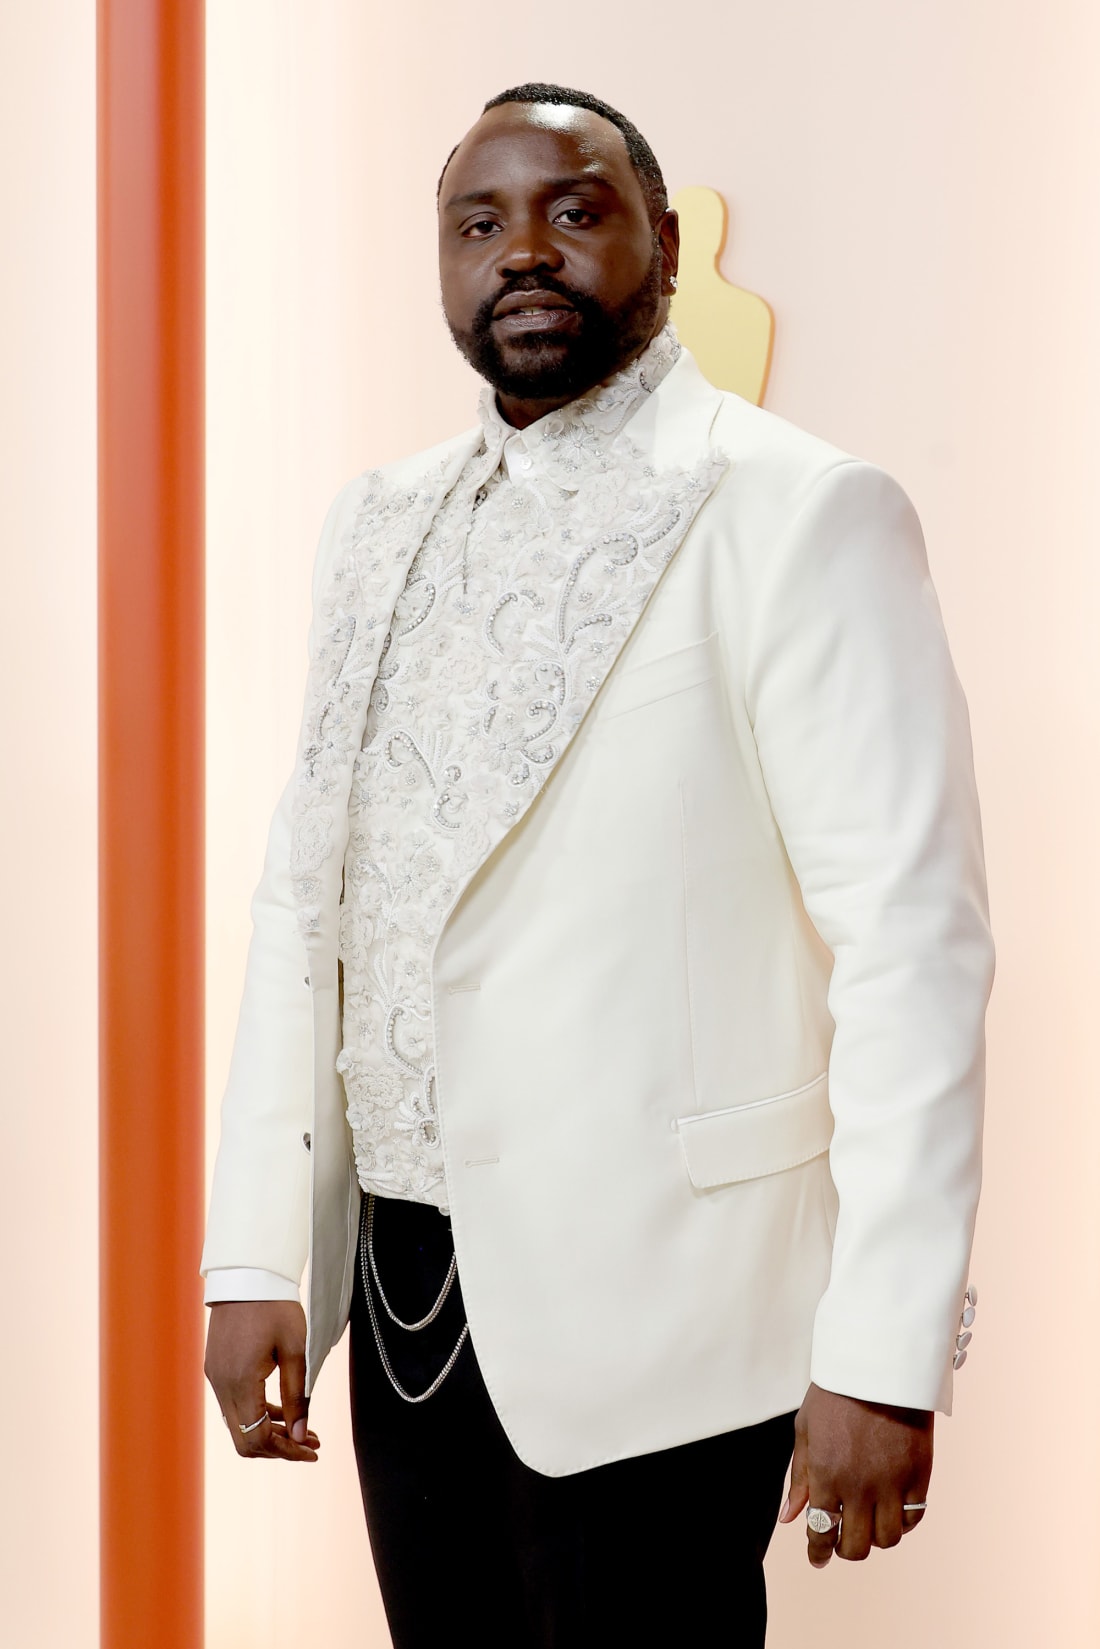 Brian Tyree Henry, nominated for Best Supporting Actor, wore a white double-breasted jacket with floral embellishments. 